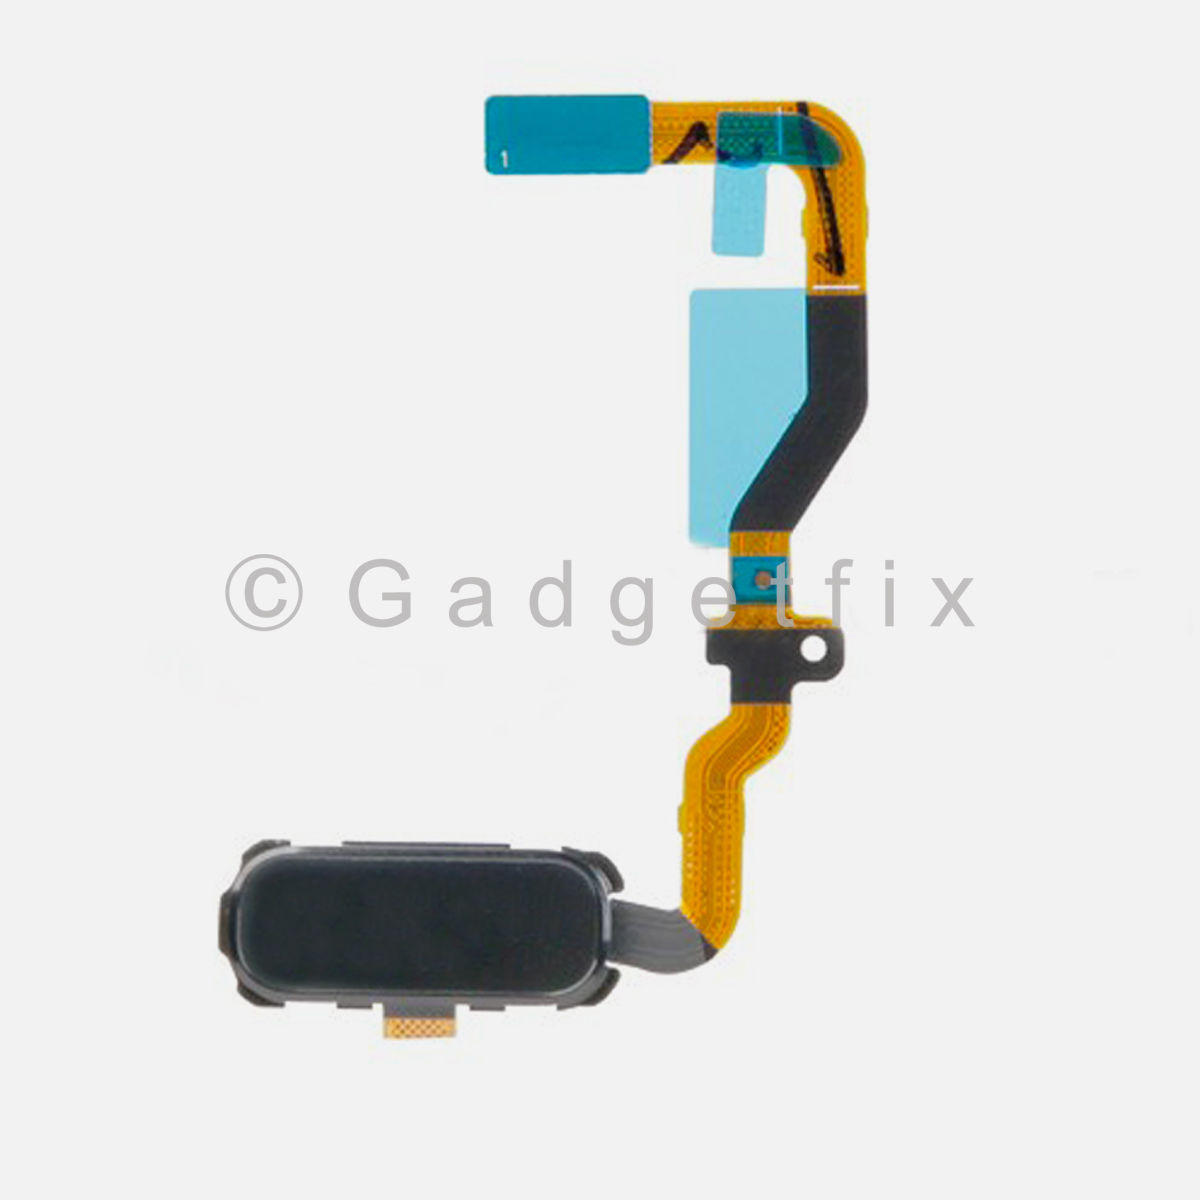  Black Menu Home Button Flex Cable Replacement Parts For Samsung Galaxy S7